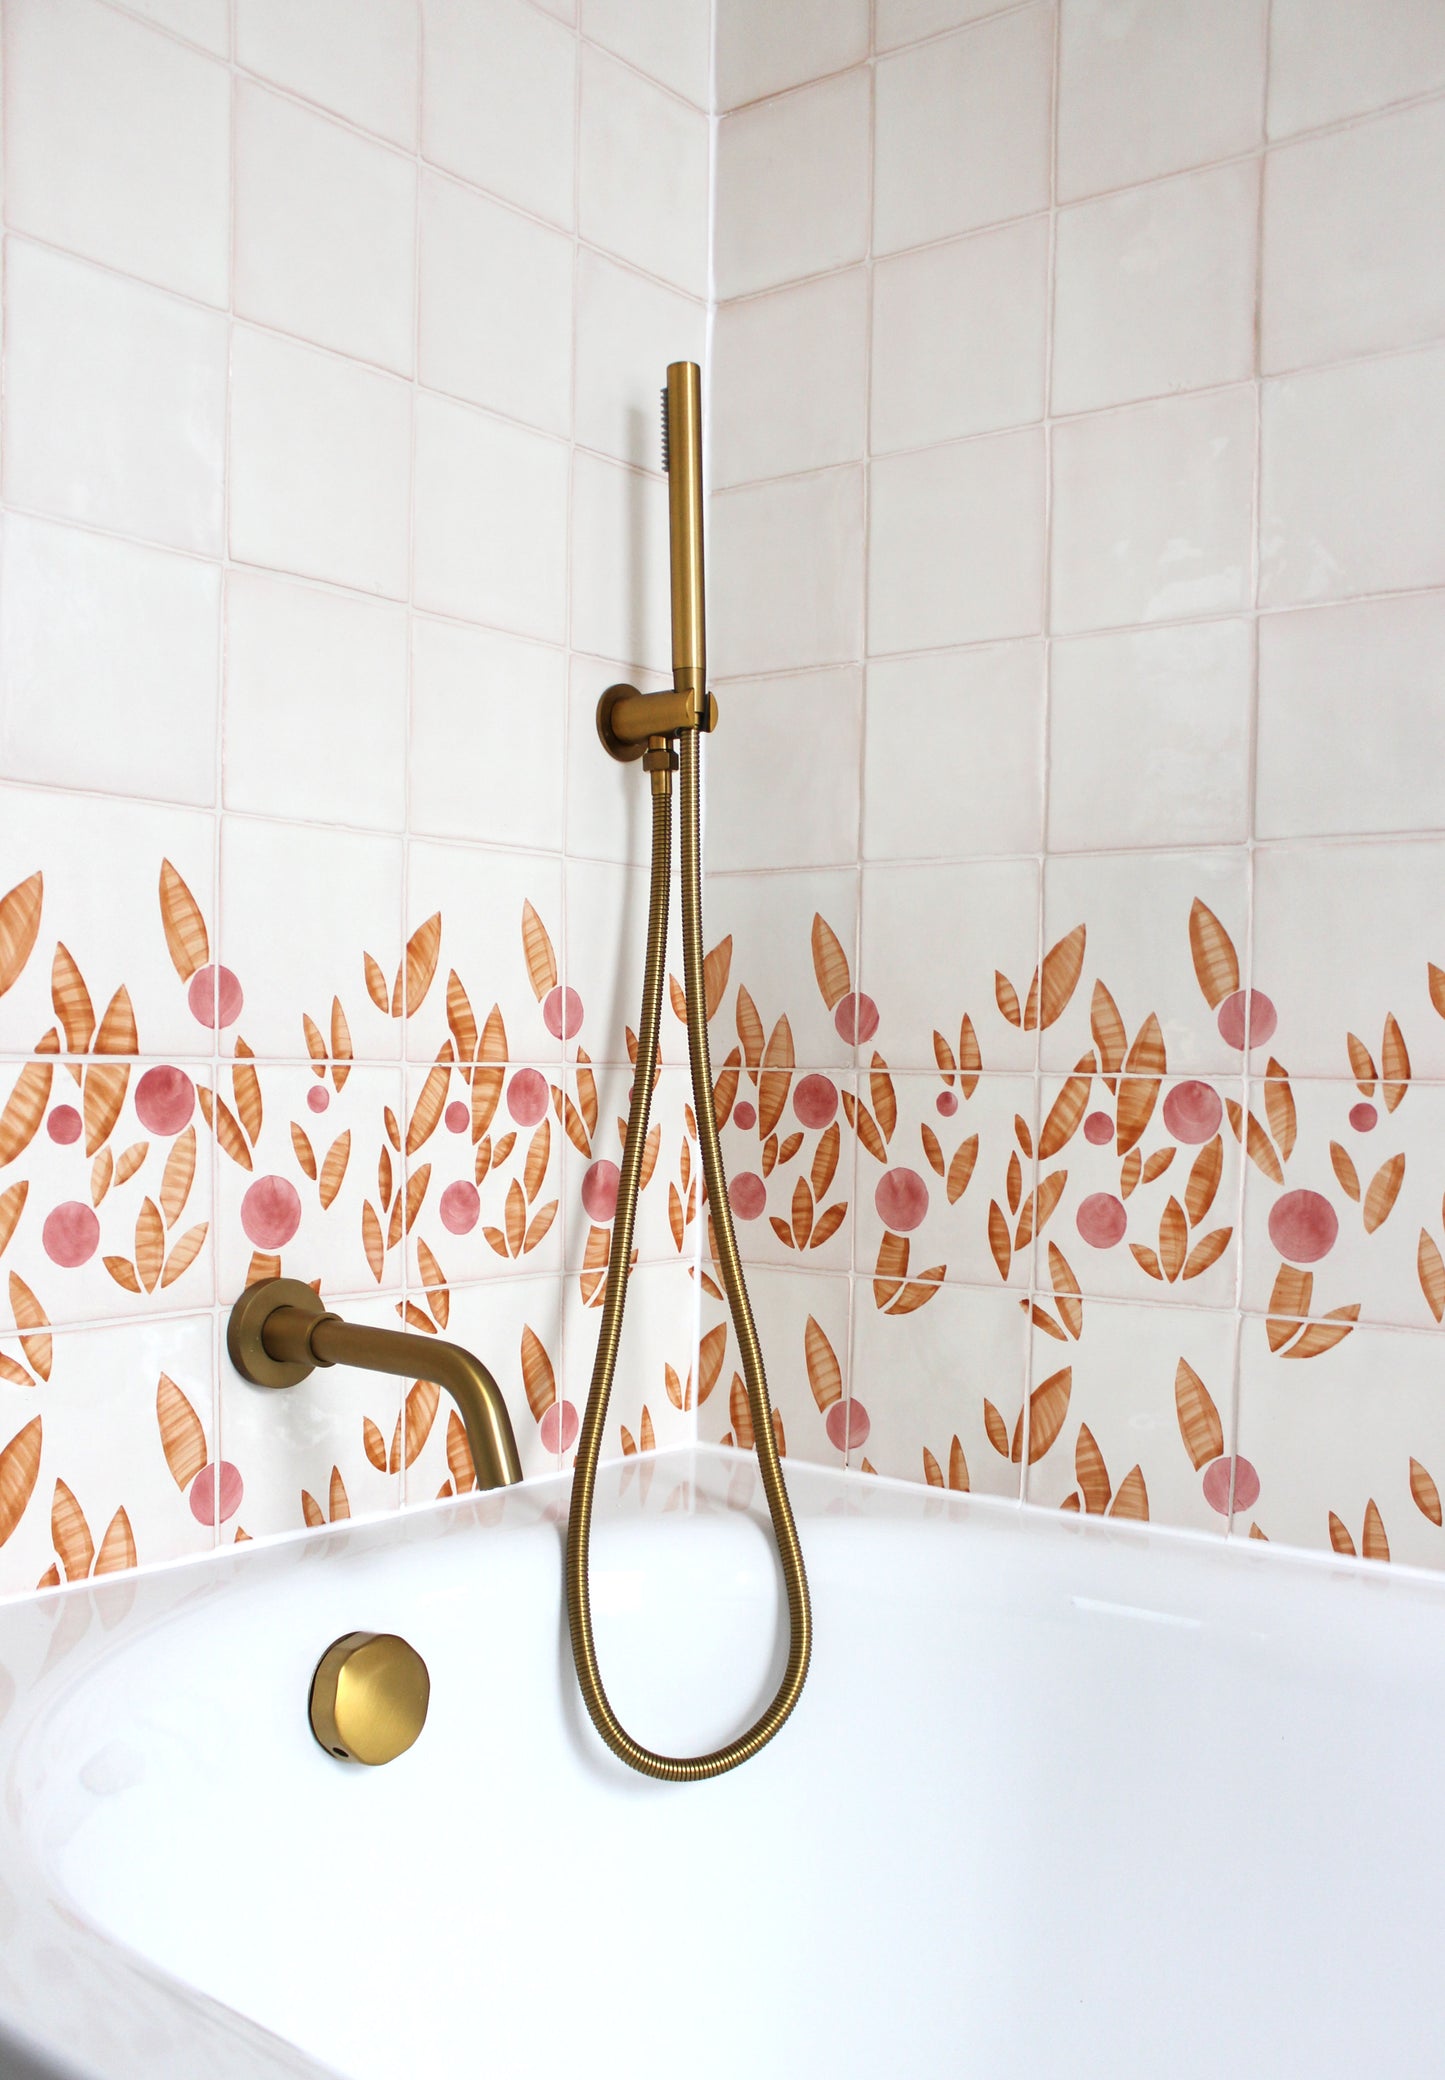 Cherry tile in Rust & Rose by Feild. Handmade and hand painted glazed terracotta tiles. Installed around a bath 